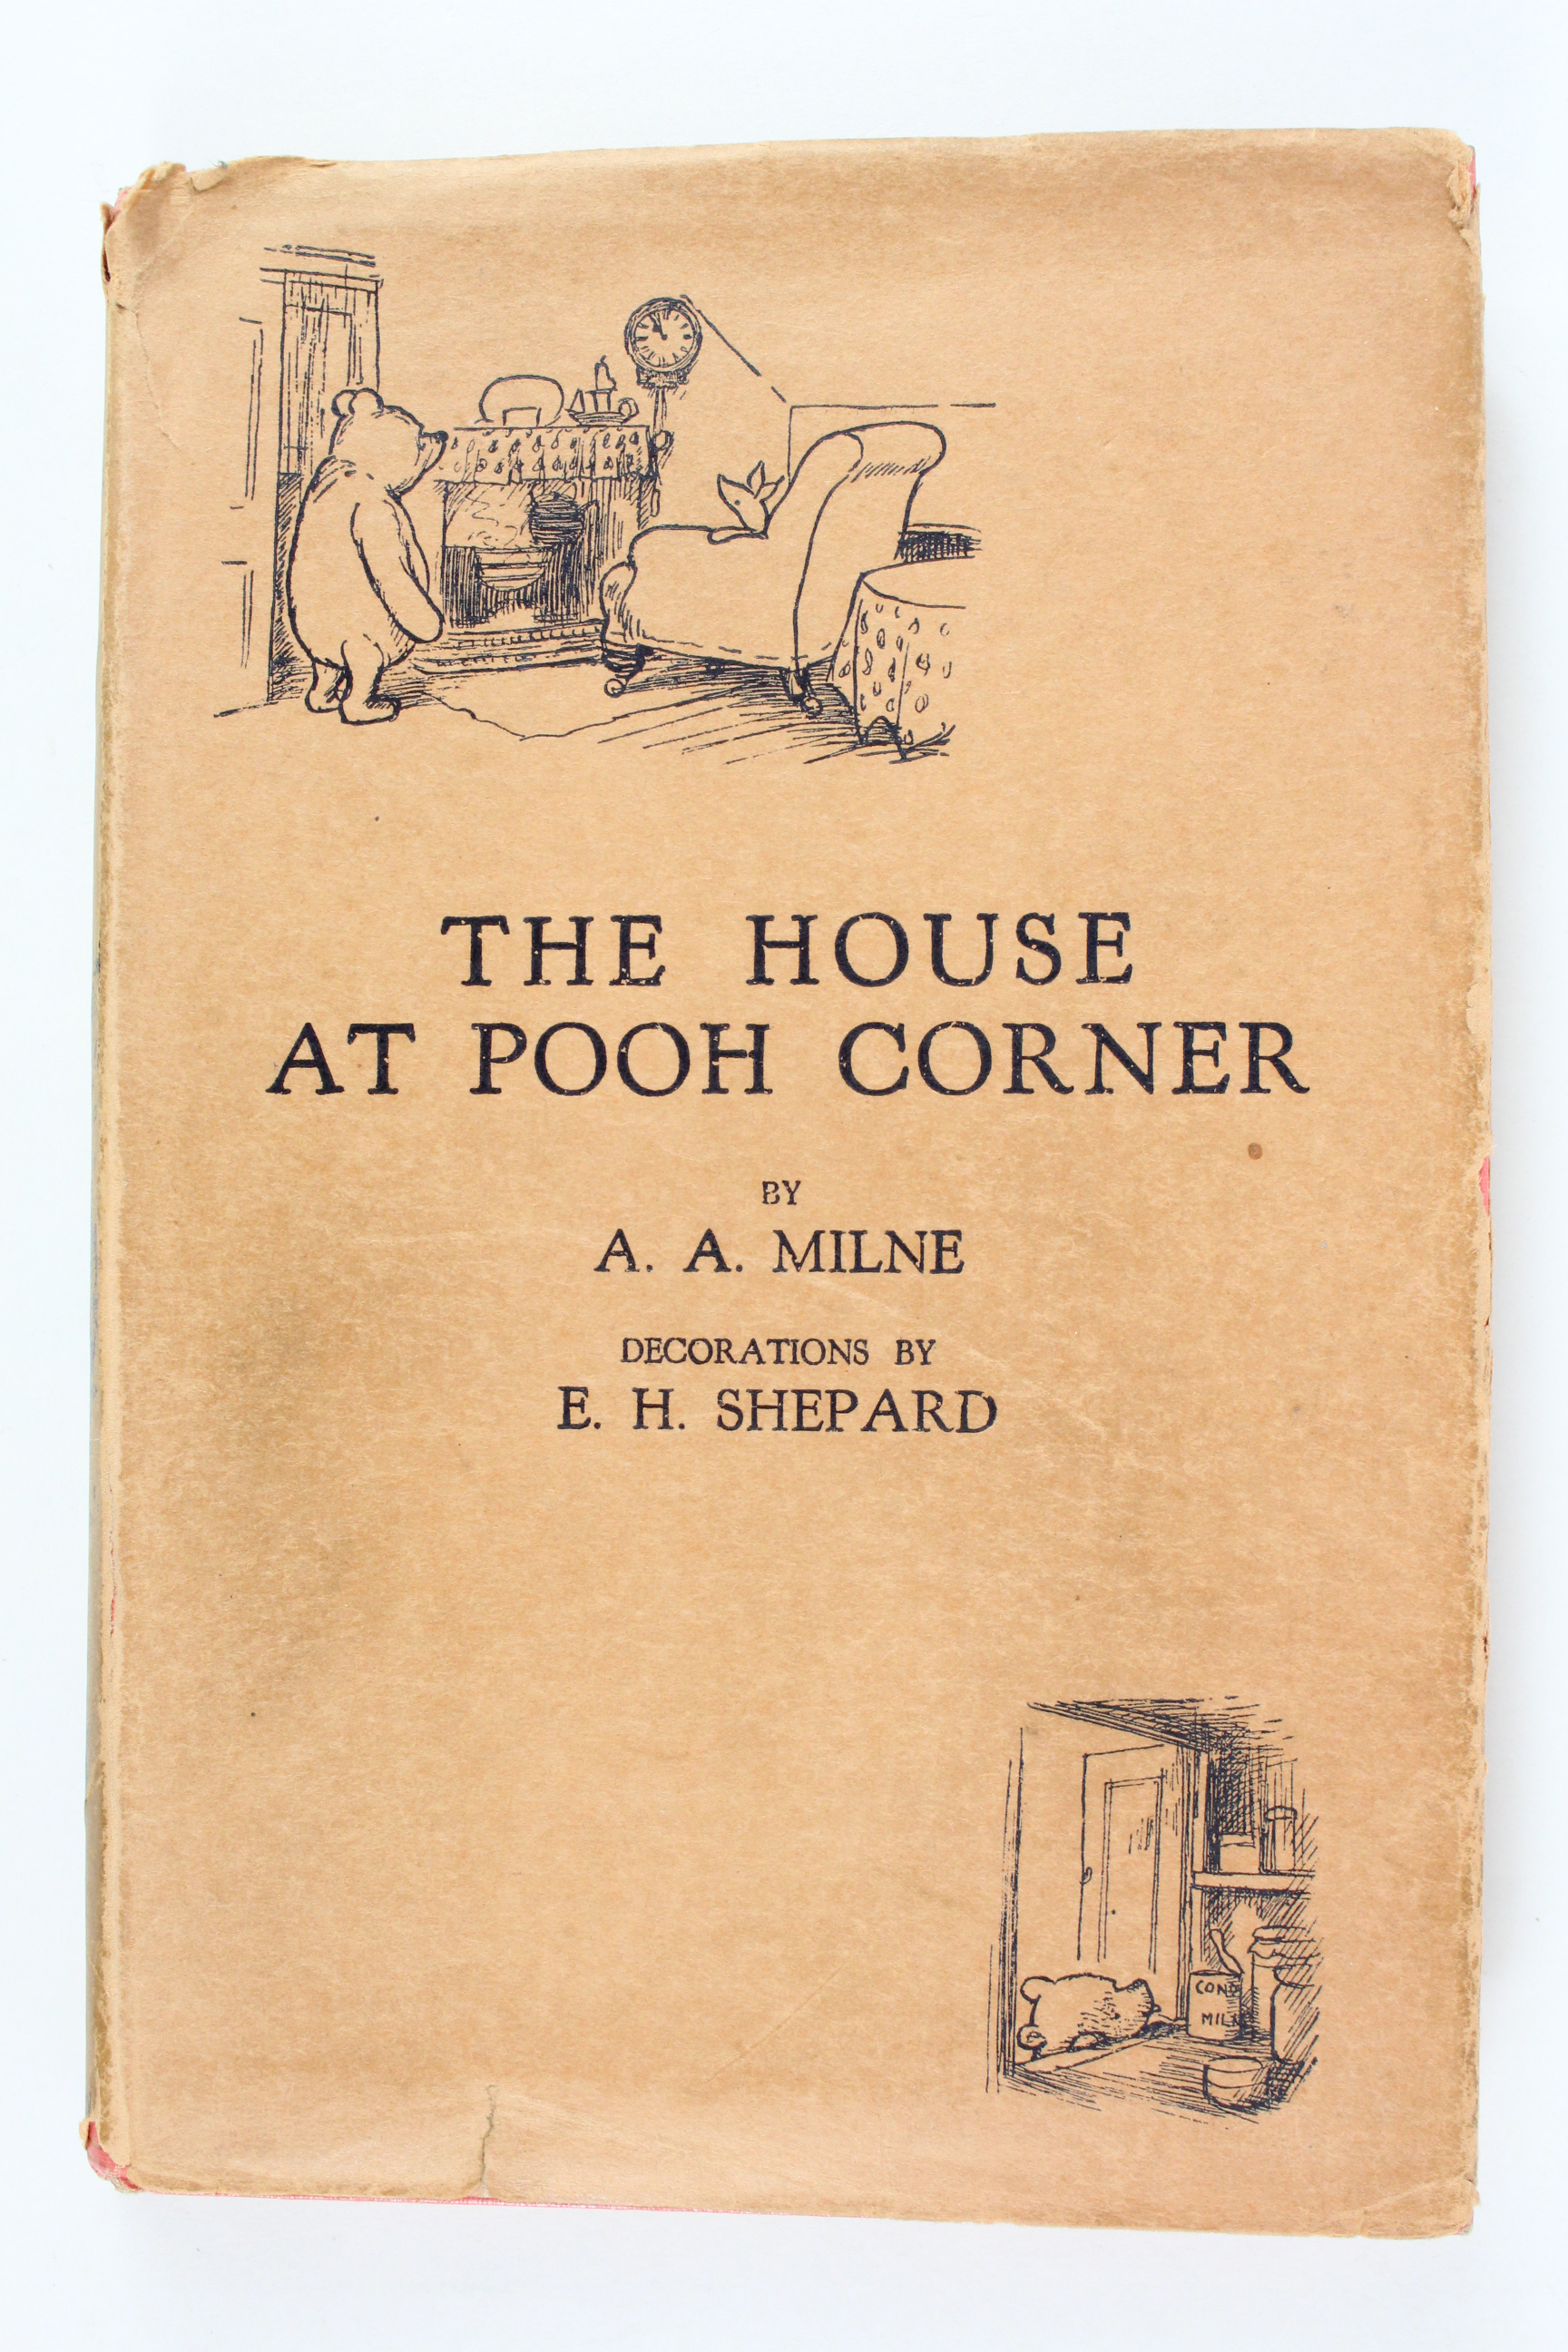 Milne (A. A.). The House at Pooh Corner, 1st edition, 1928, illustrations by E. H. Shepard, top edge